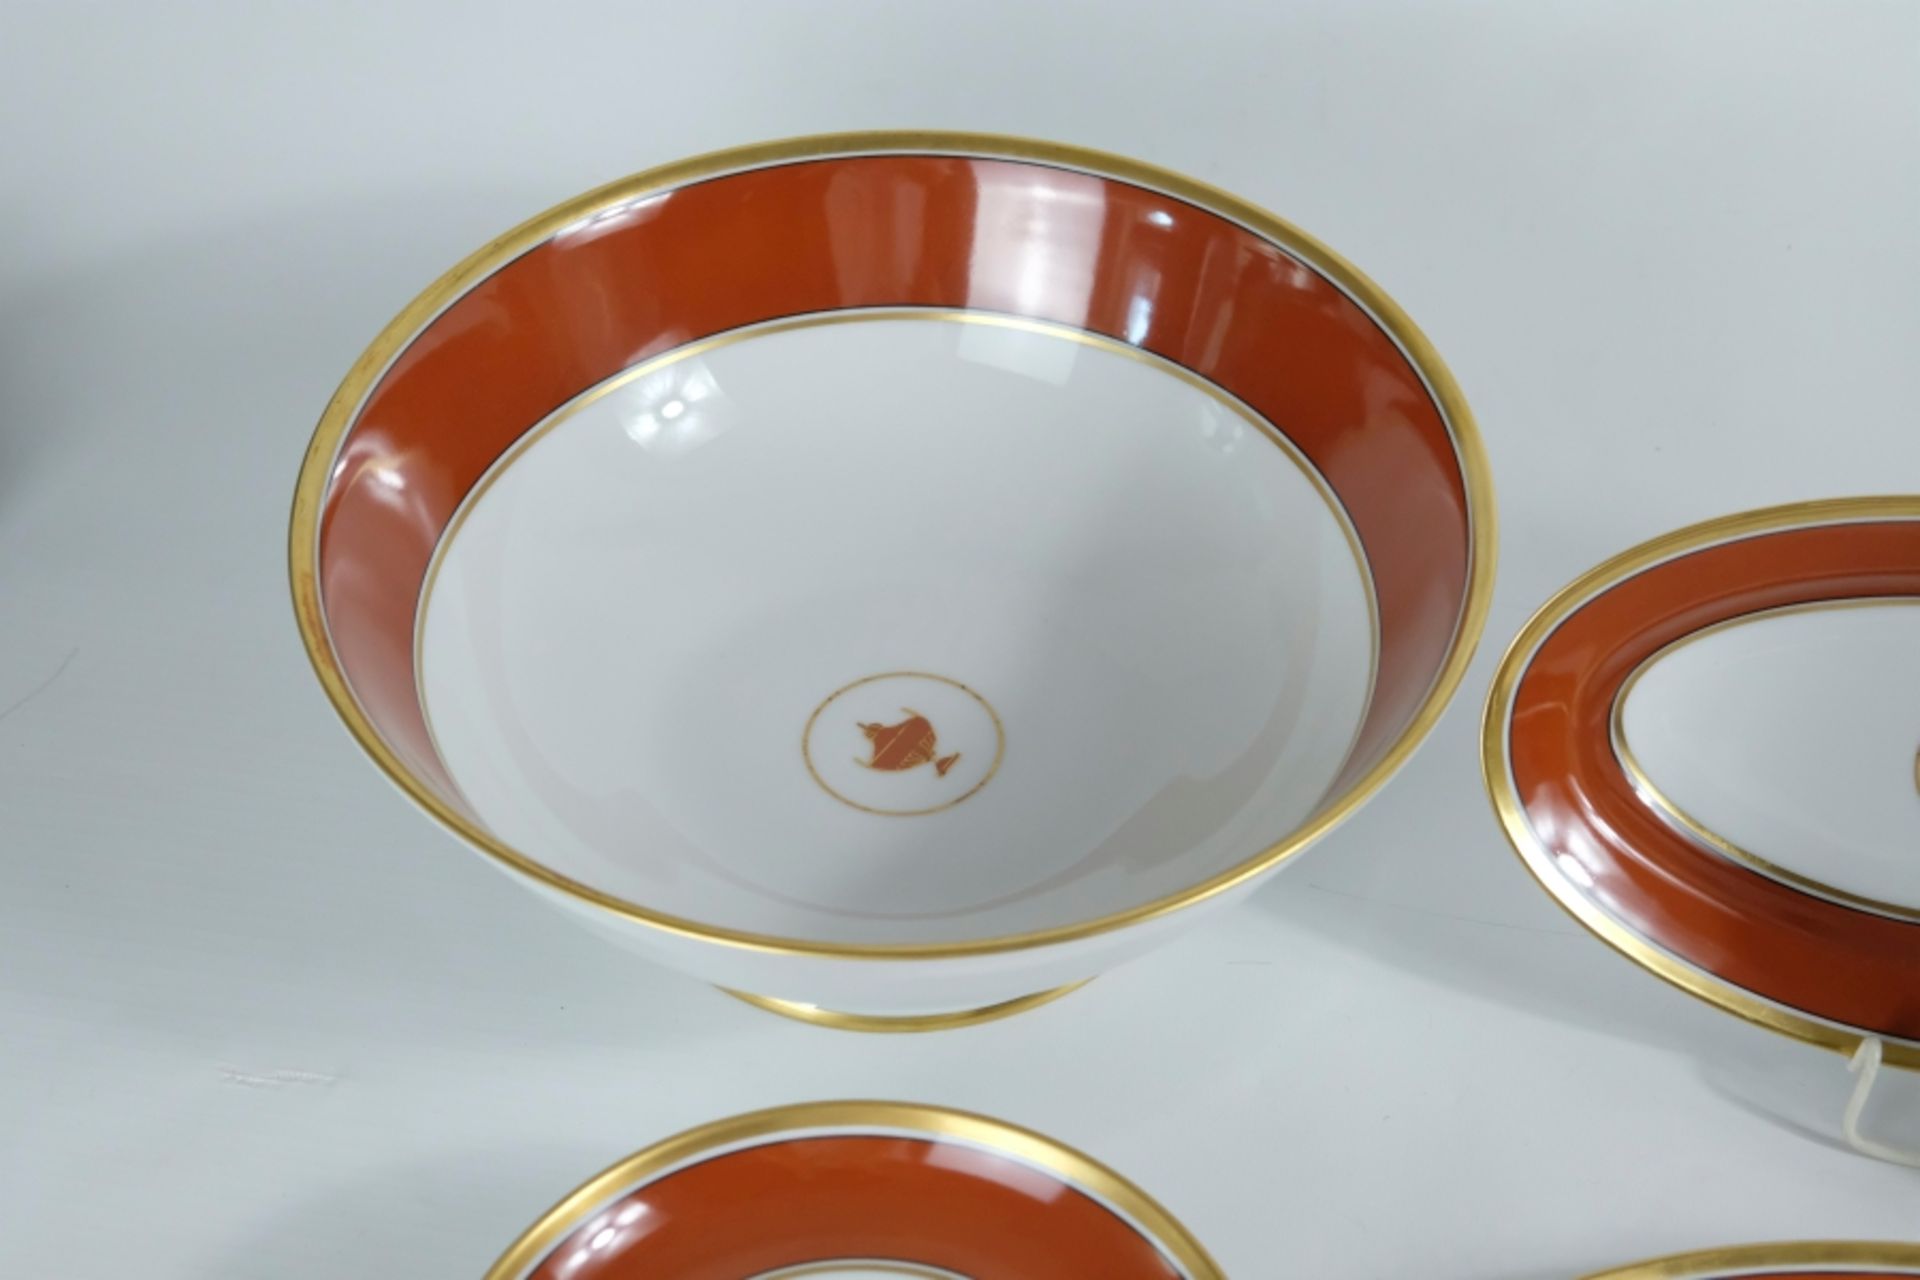 Richard Ginori "Contessa" dinner service, porcelain, white and terracotta with gold rim, consisting - Image 4 of 8